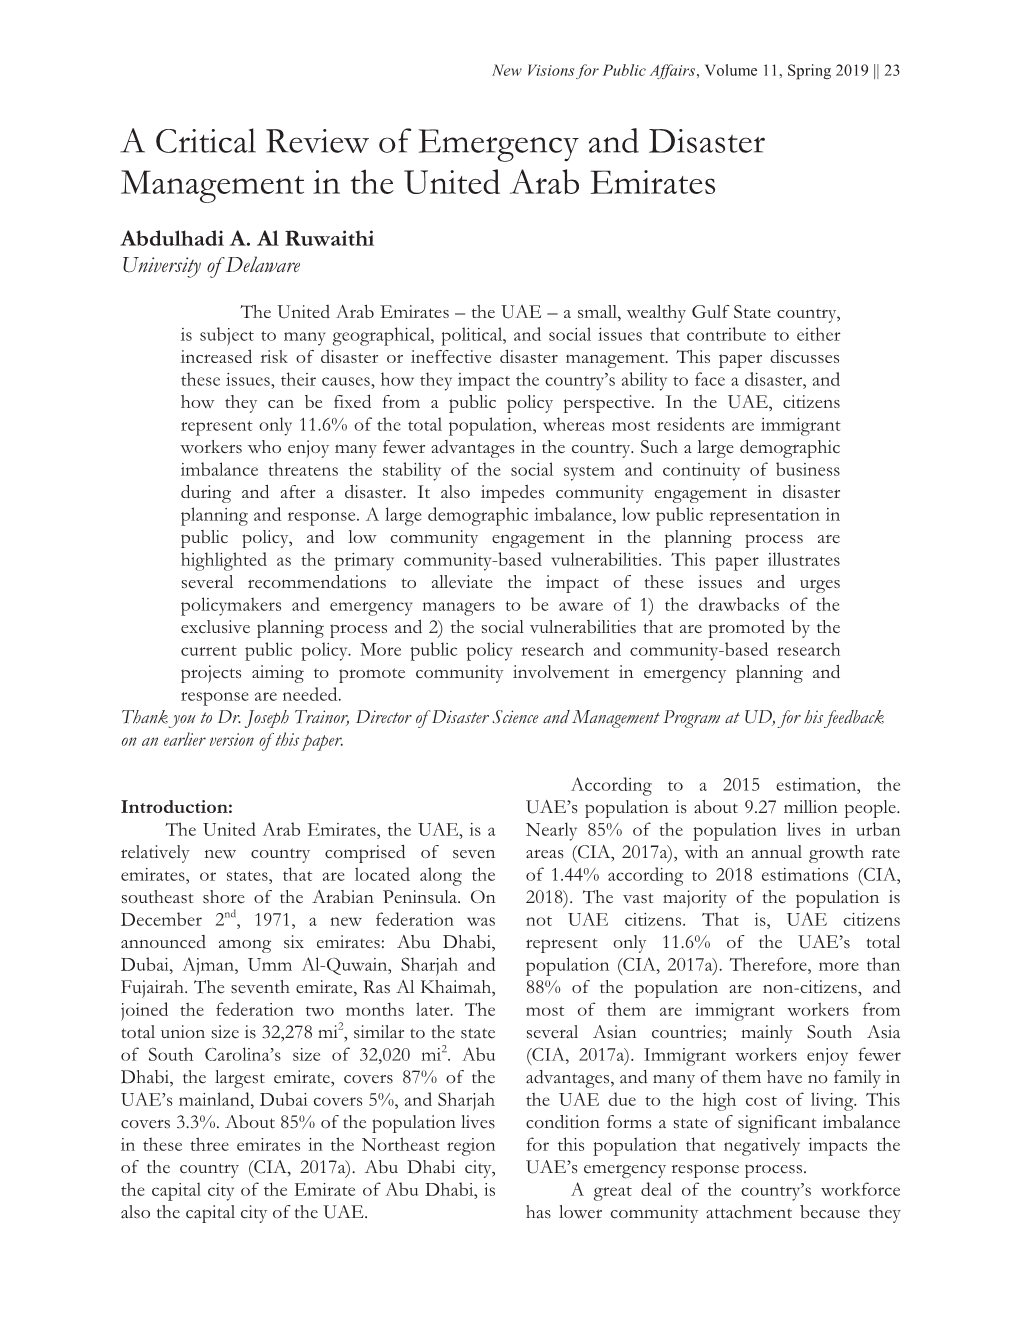 A Critical Review of Emergency and Disaster Management in the United Arab Emirates